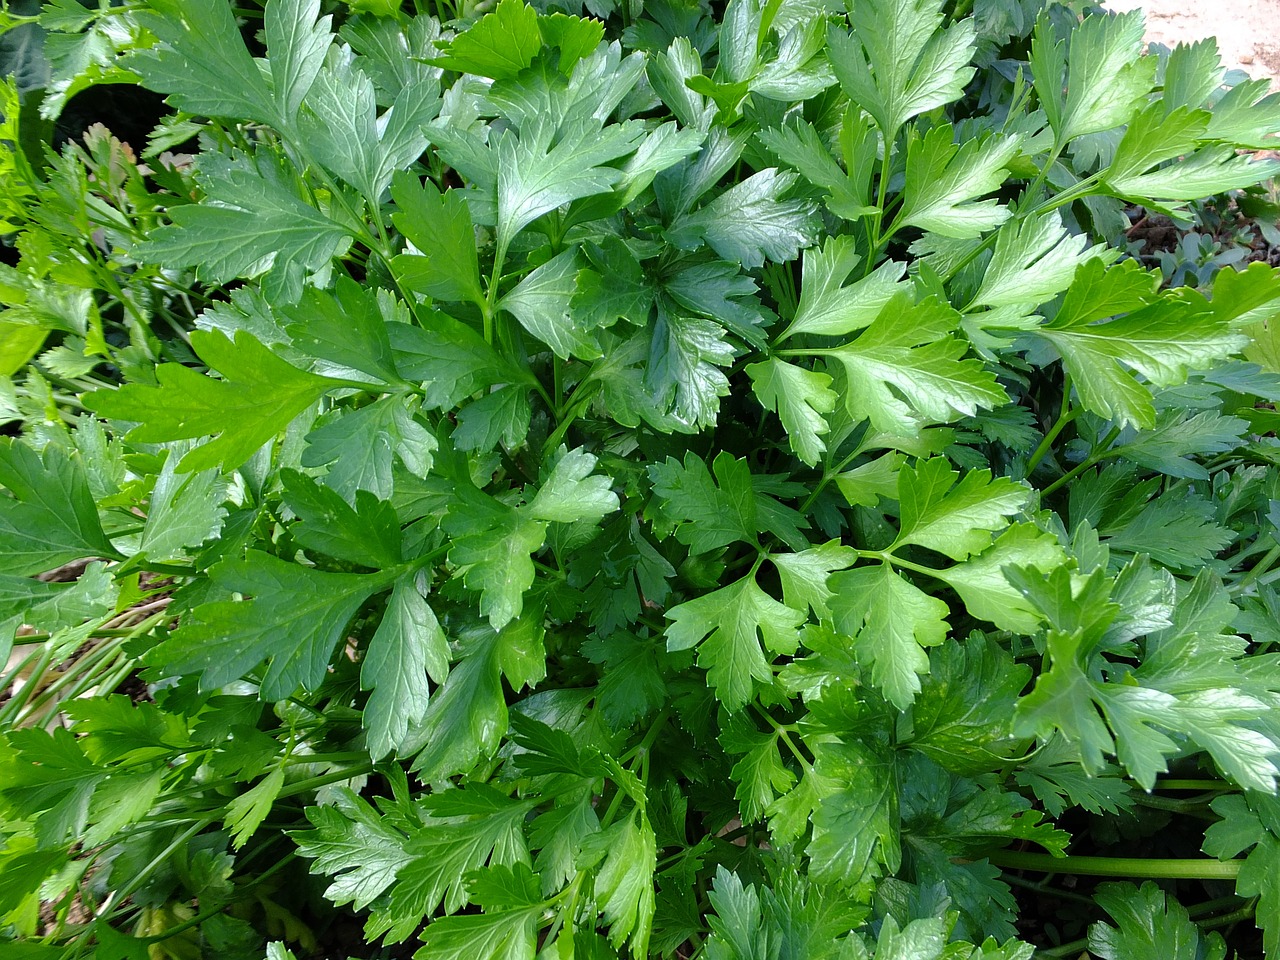 Roots, stems and all—parsley hydrosol